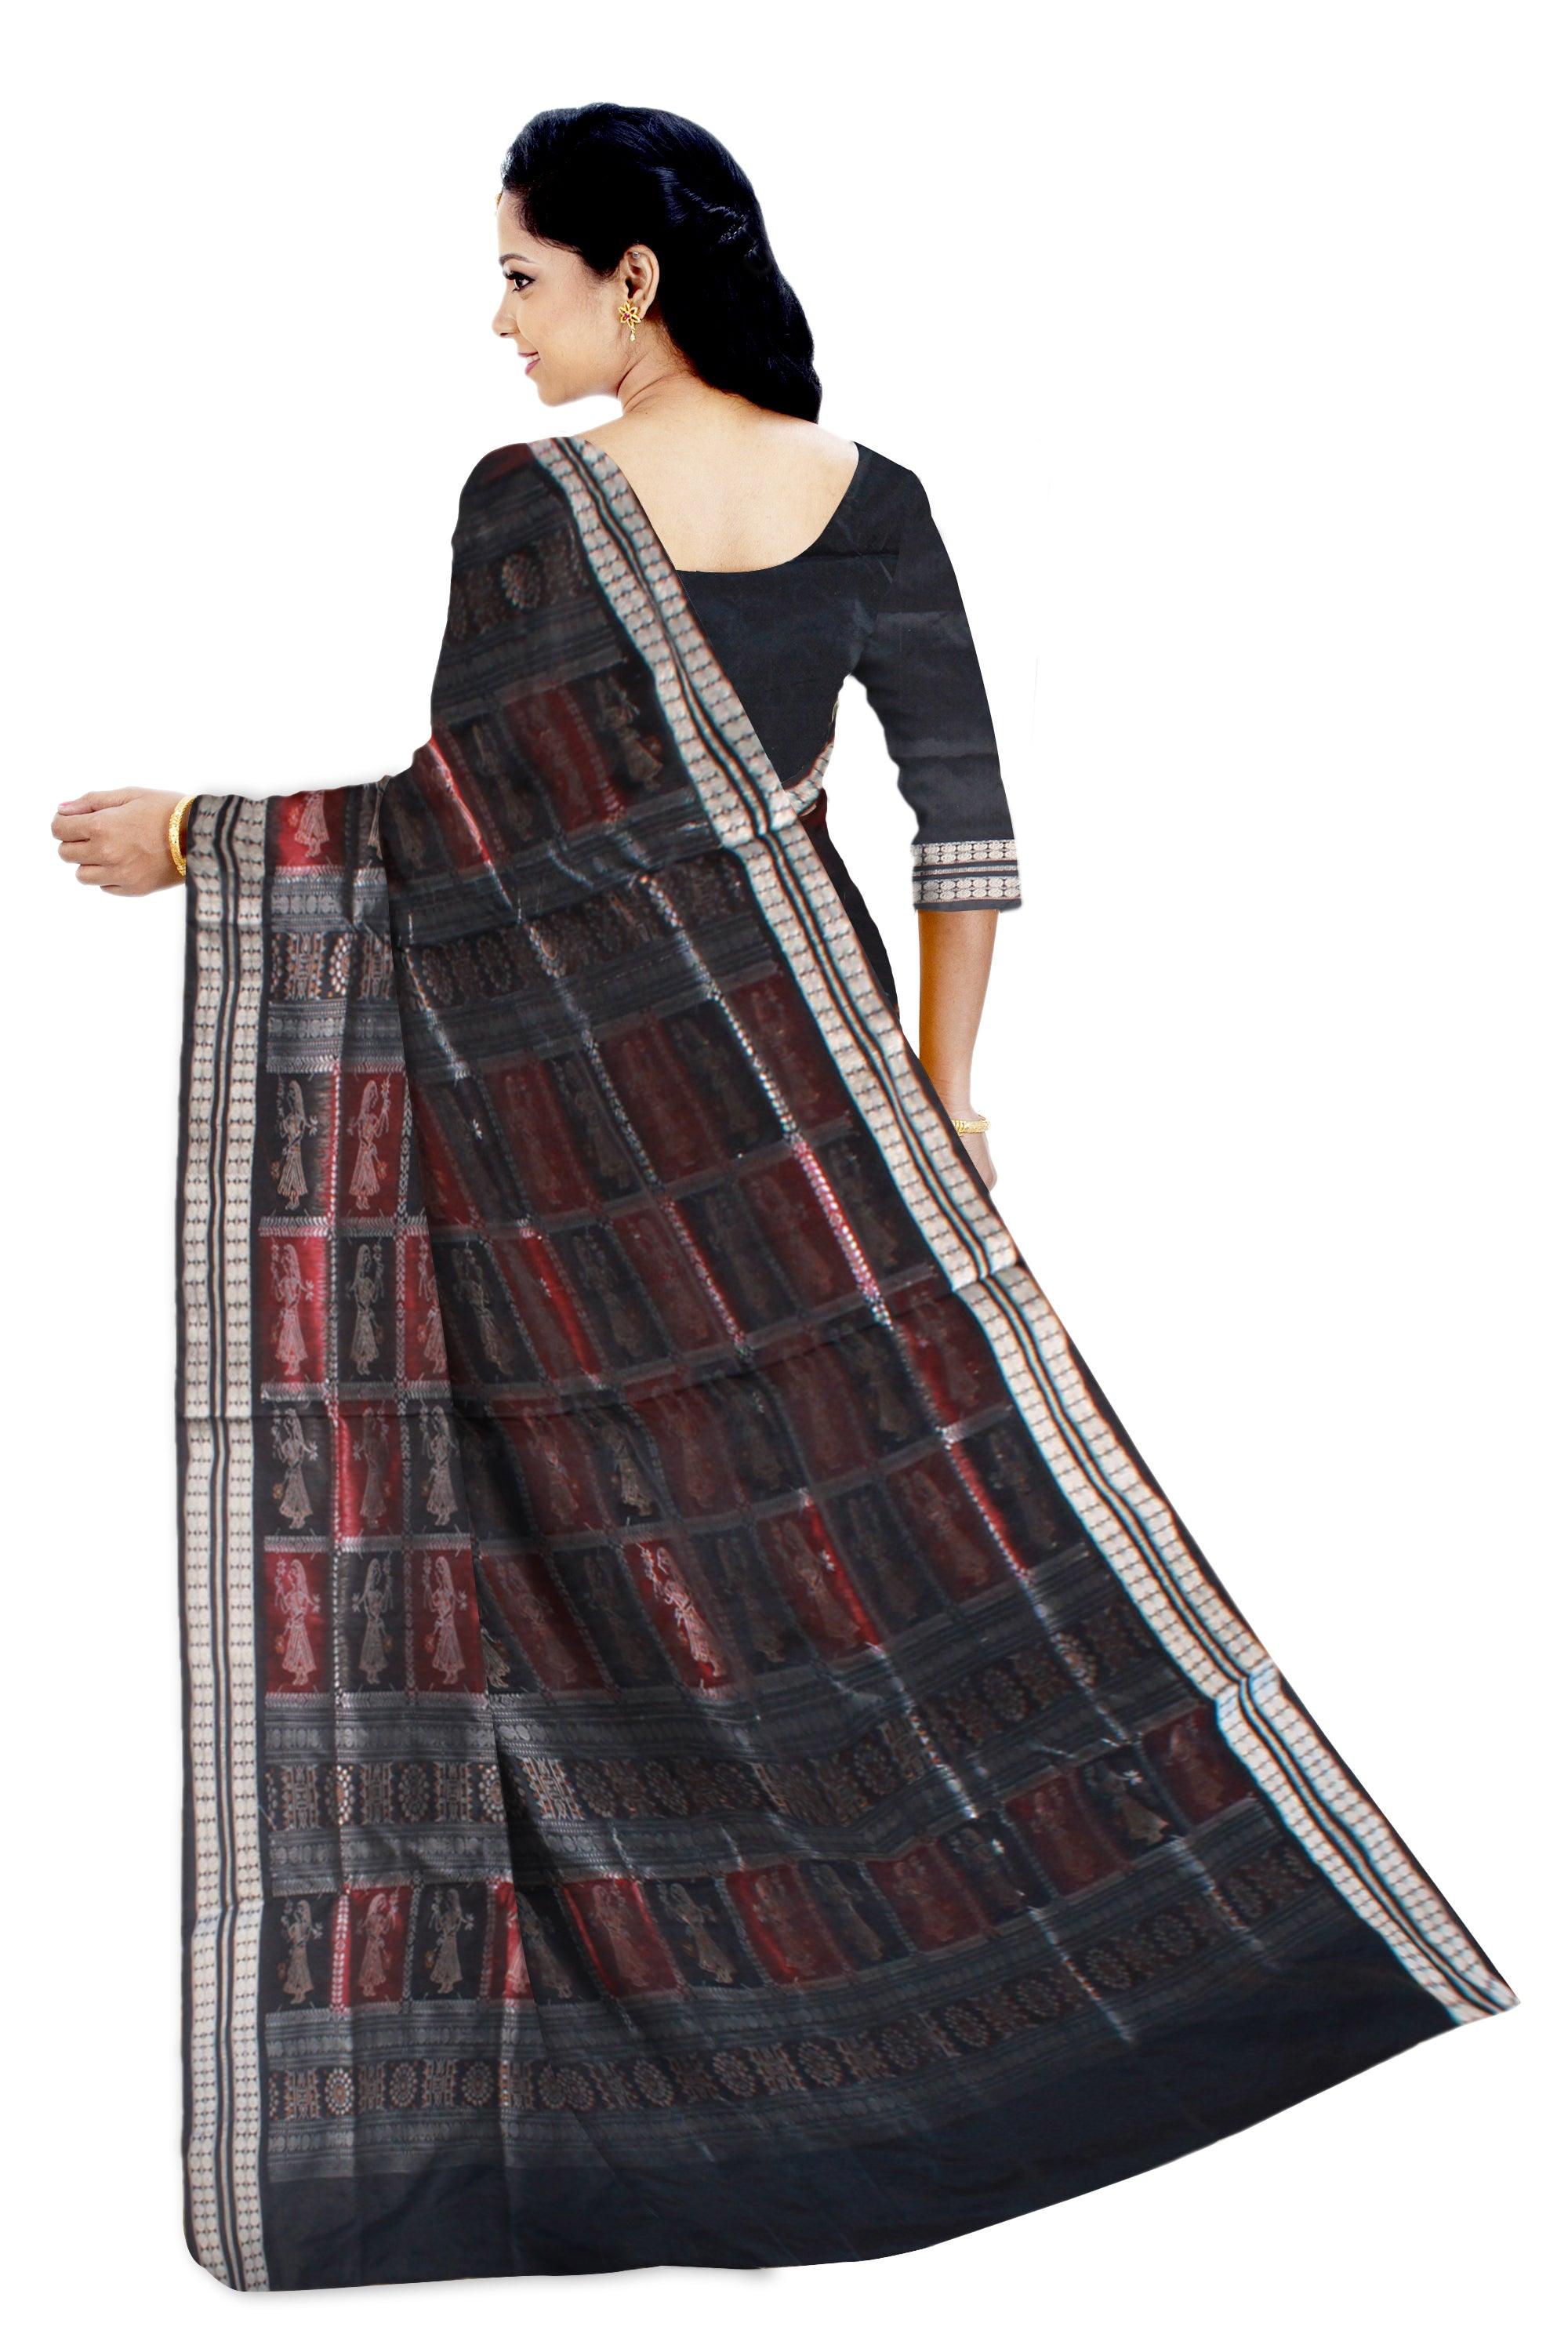 BLACK AND MAROON COLOR DOLL PRINT PATA SAREE , ATTACHED WITH MATCHING BLOUSE PIECE. - Koshali Arts & Crafts Enterprise